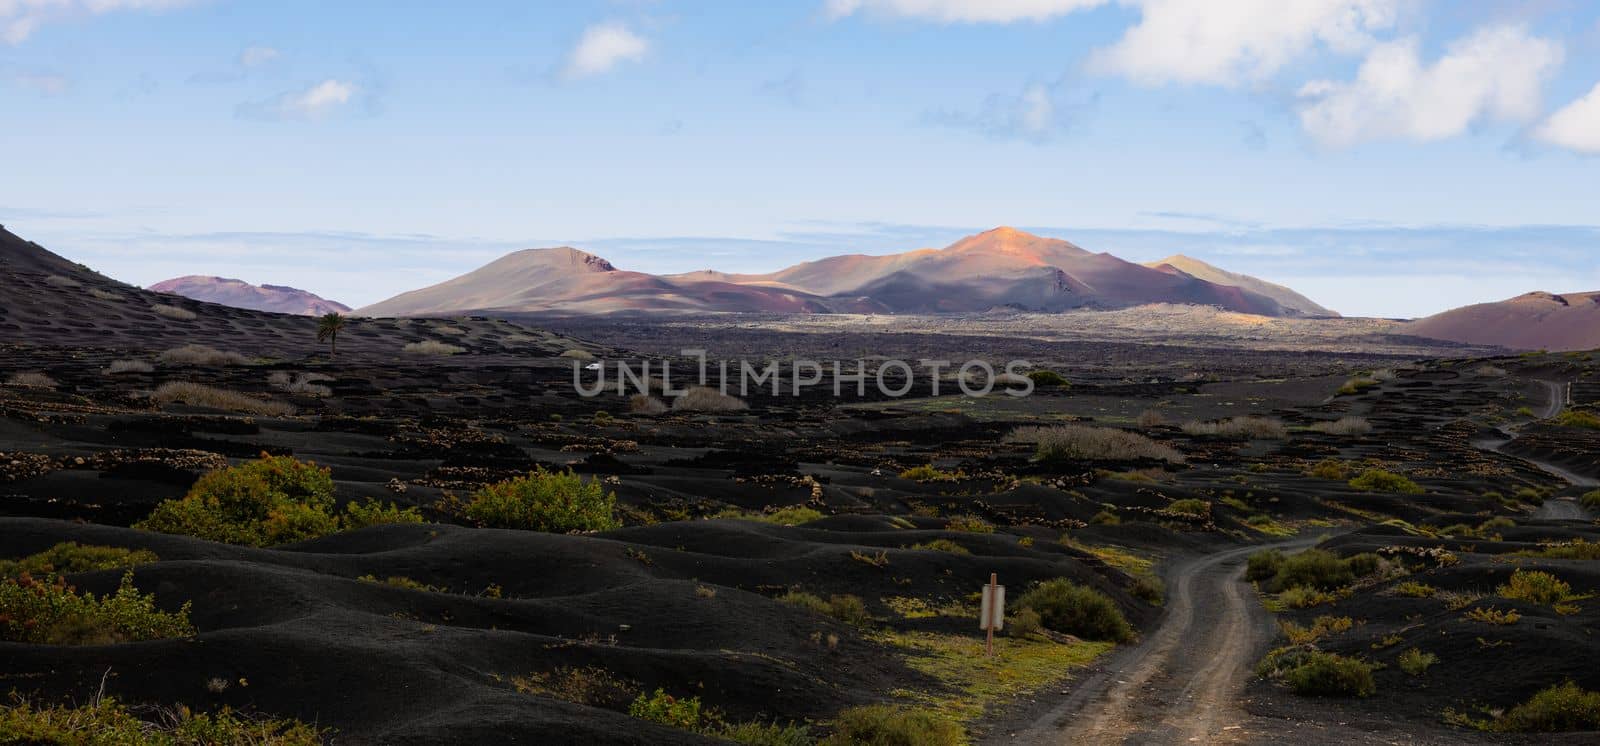 Black volcanic landscape of La Geria wine growing region with view of Timanfaya National Park in Lanzarote. Popular touristic attraction in Lanzarote island, Canary Islands, Spain. by kasto